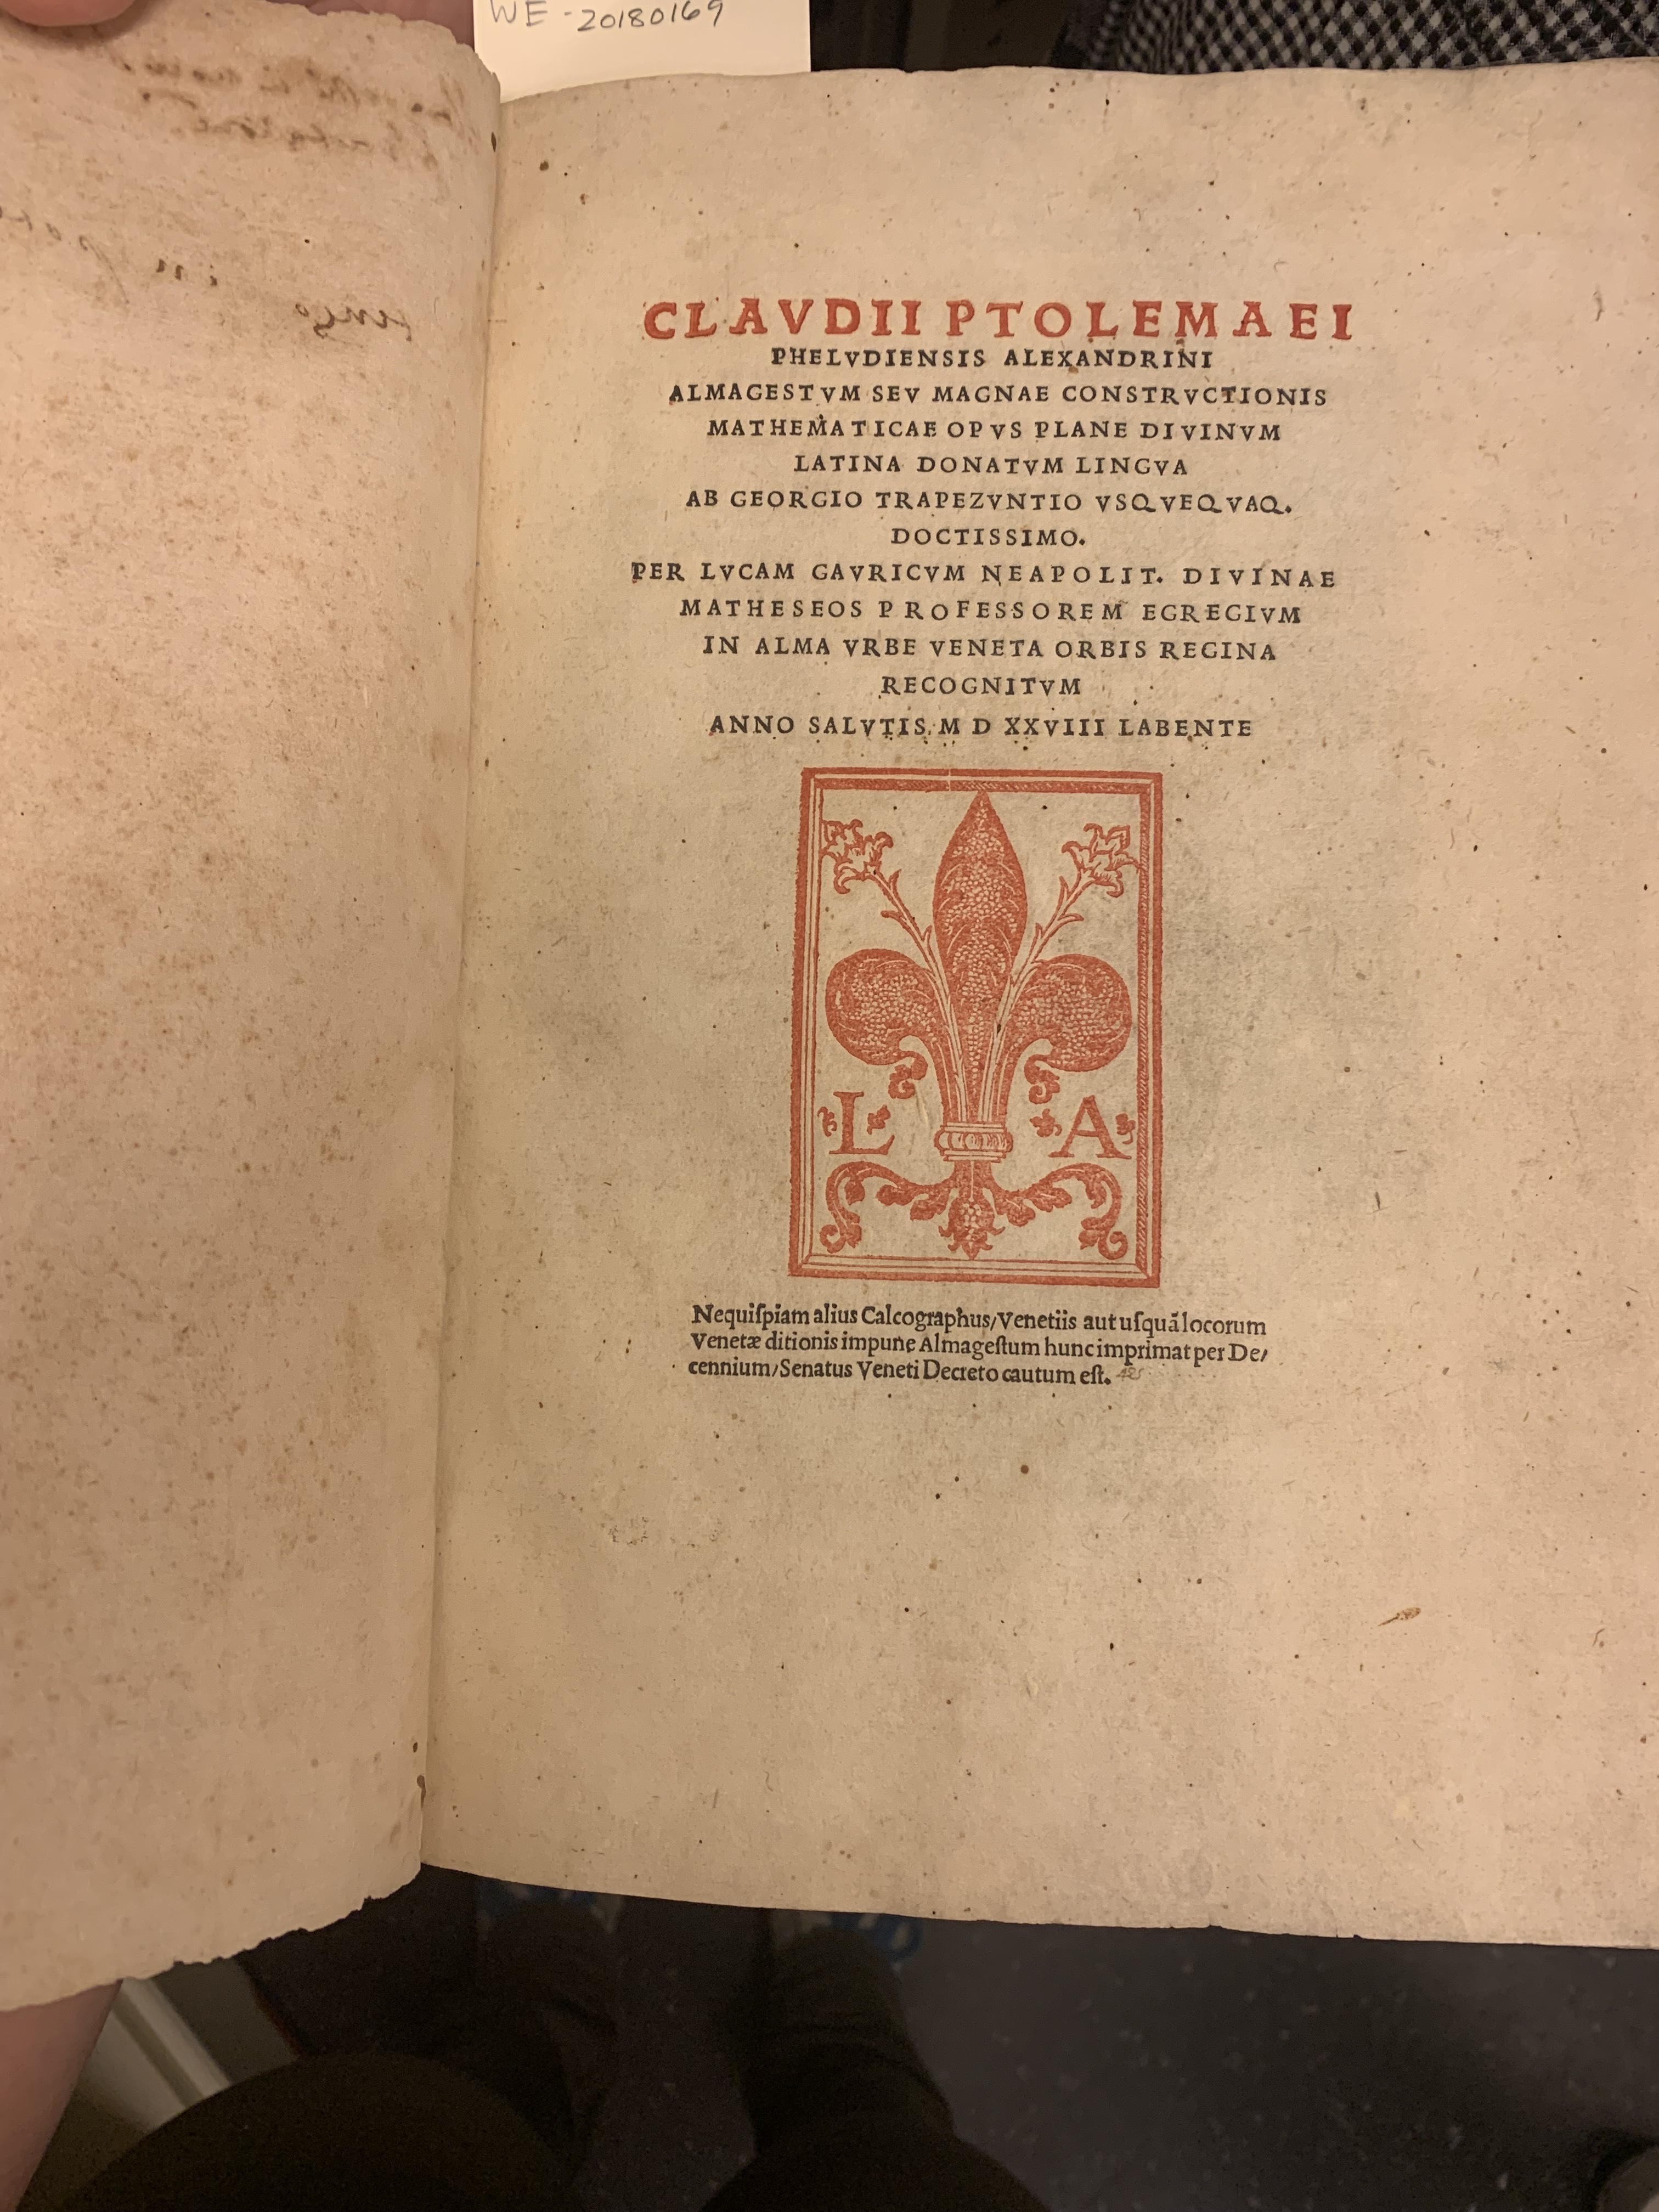 The inside cover of the Niels Bohr Library & Archives’ copy of the Almagest